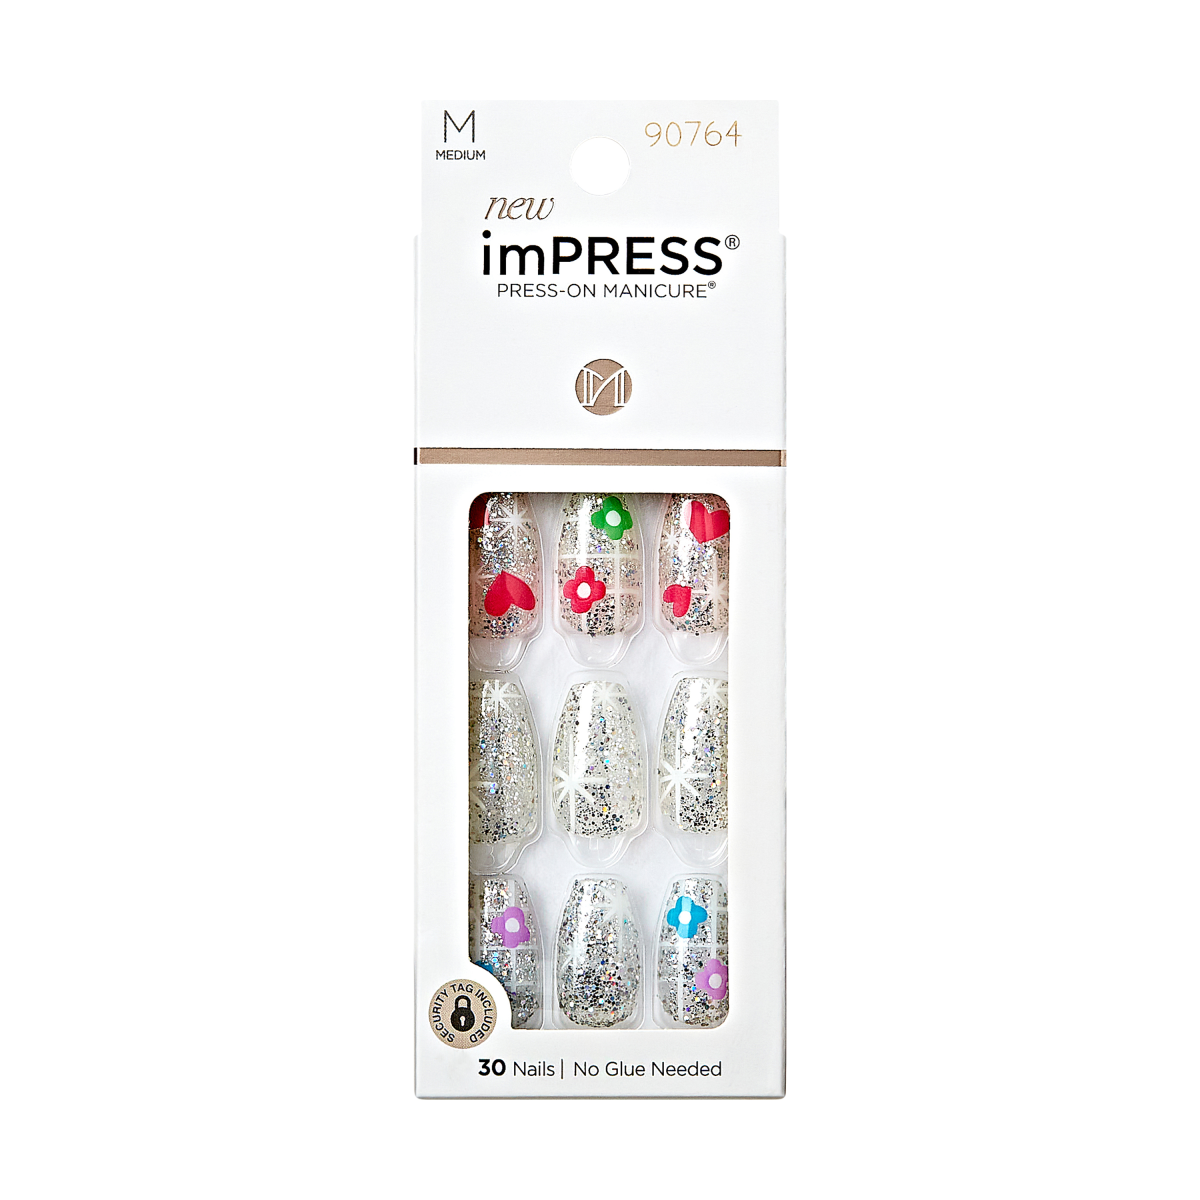 imPRESS Press-On Manicure 10th Mani-Versary Collection - Bling Bling